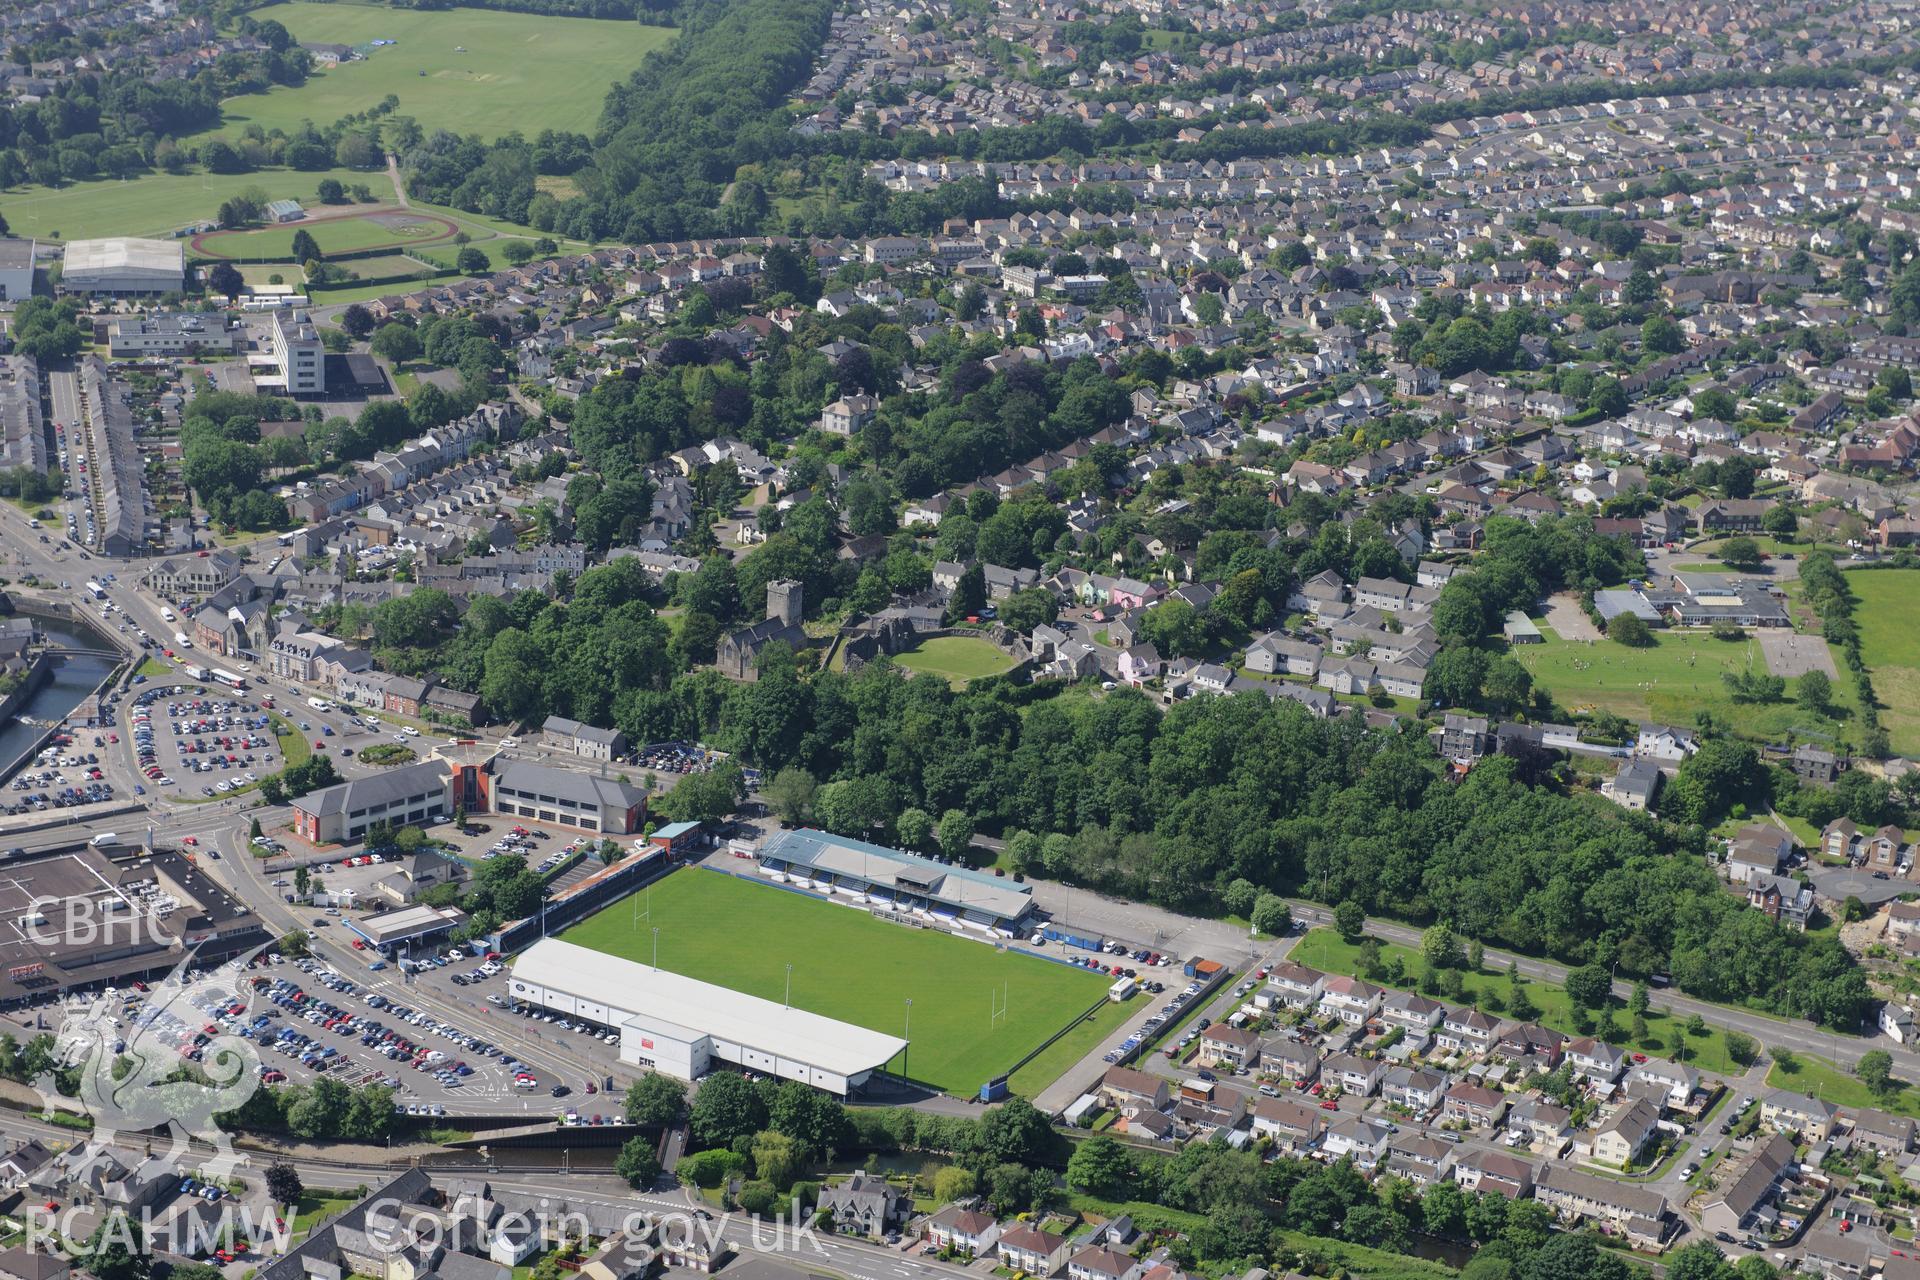 View of Bridgend including St. Illtyd's Church; Newcastle Castle; Brewery Field Stadium and Newbridge Fields. Oblique aerial photograph taken during the Royal Commission?s programme of archaeological aerial reconnaissance by Toby Driver on 19th June 2015.